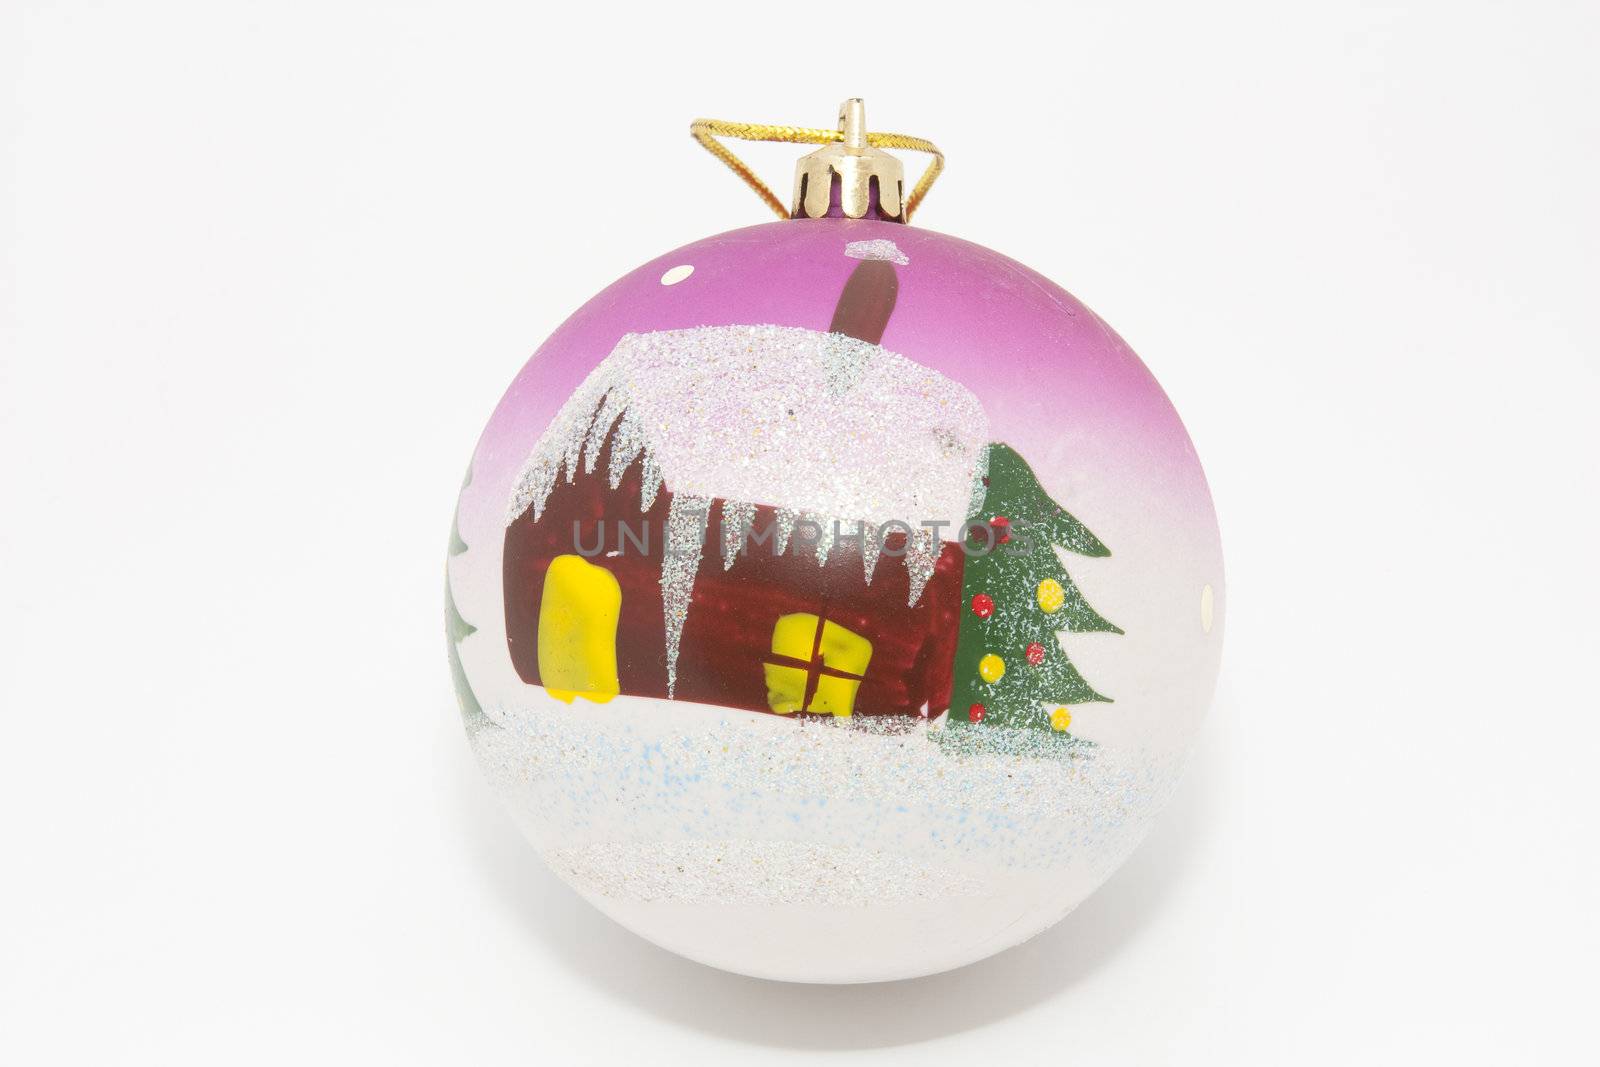 Fur-tree toy - a sphere with house and fur-tree drawing by Jaklin